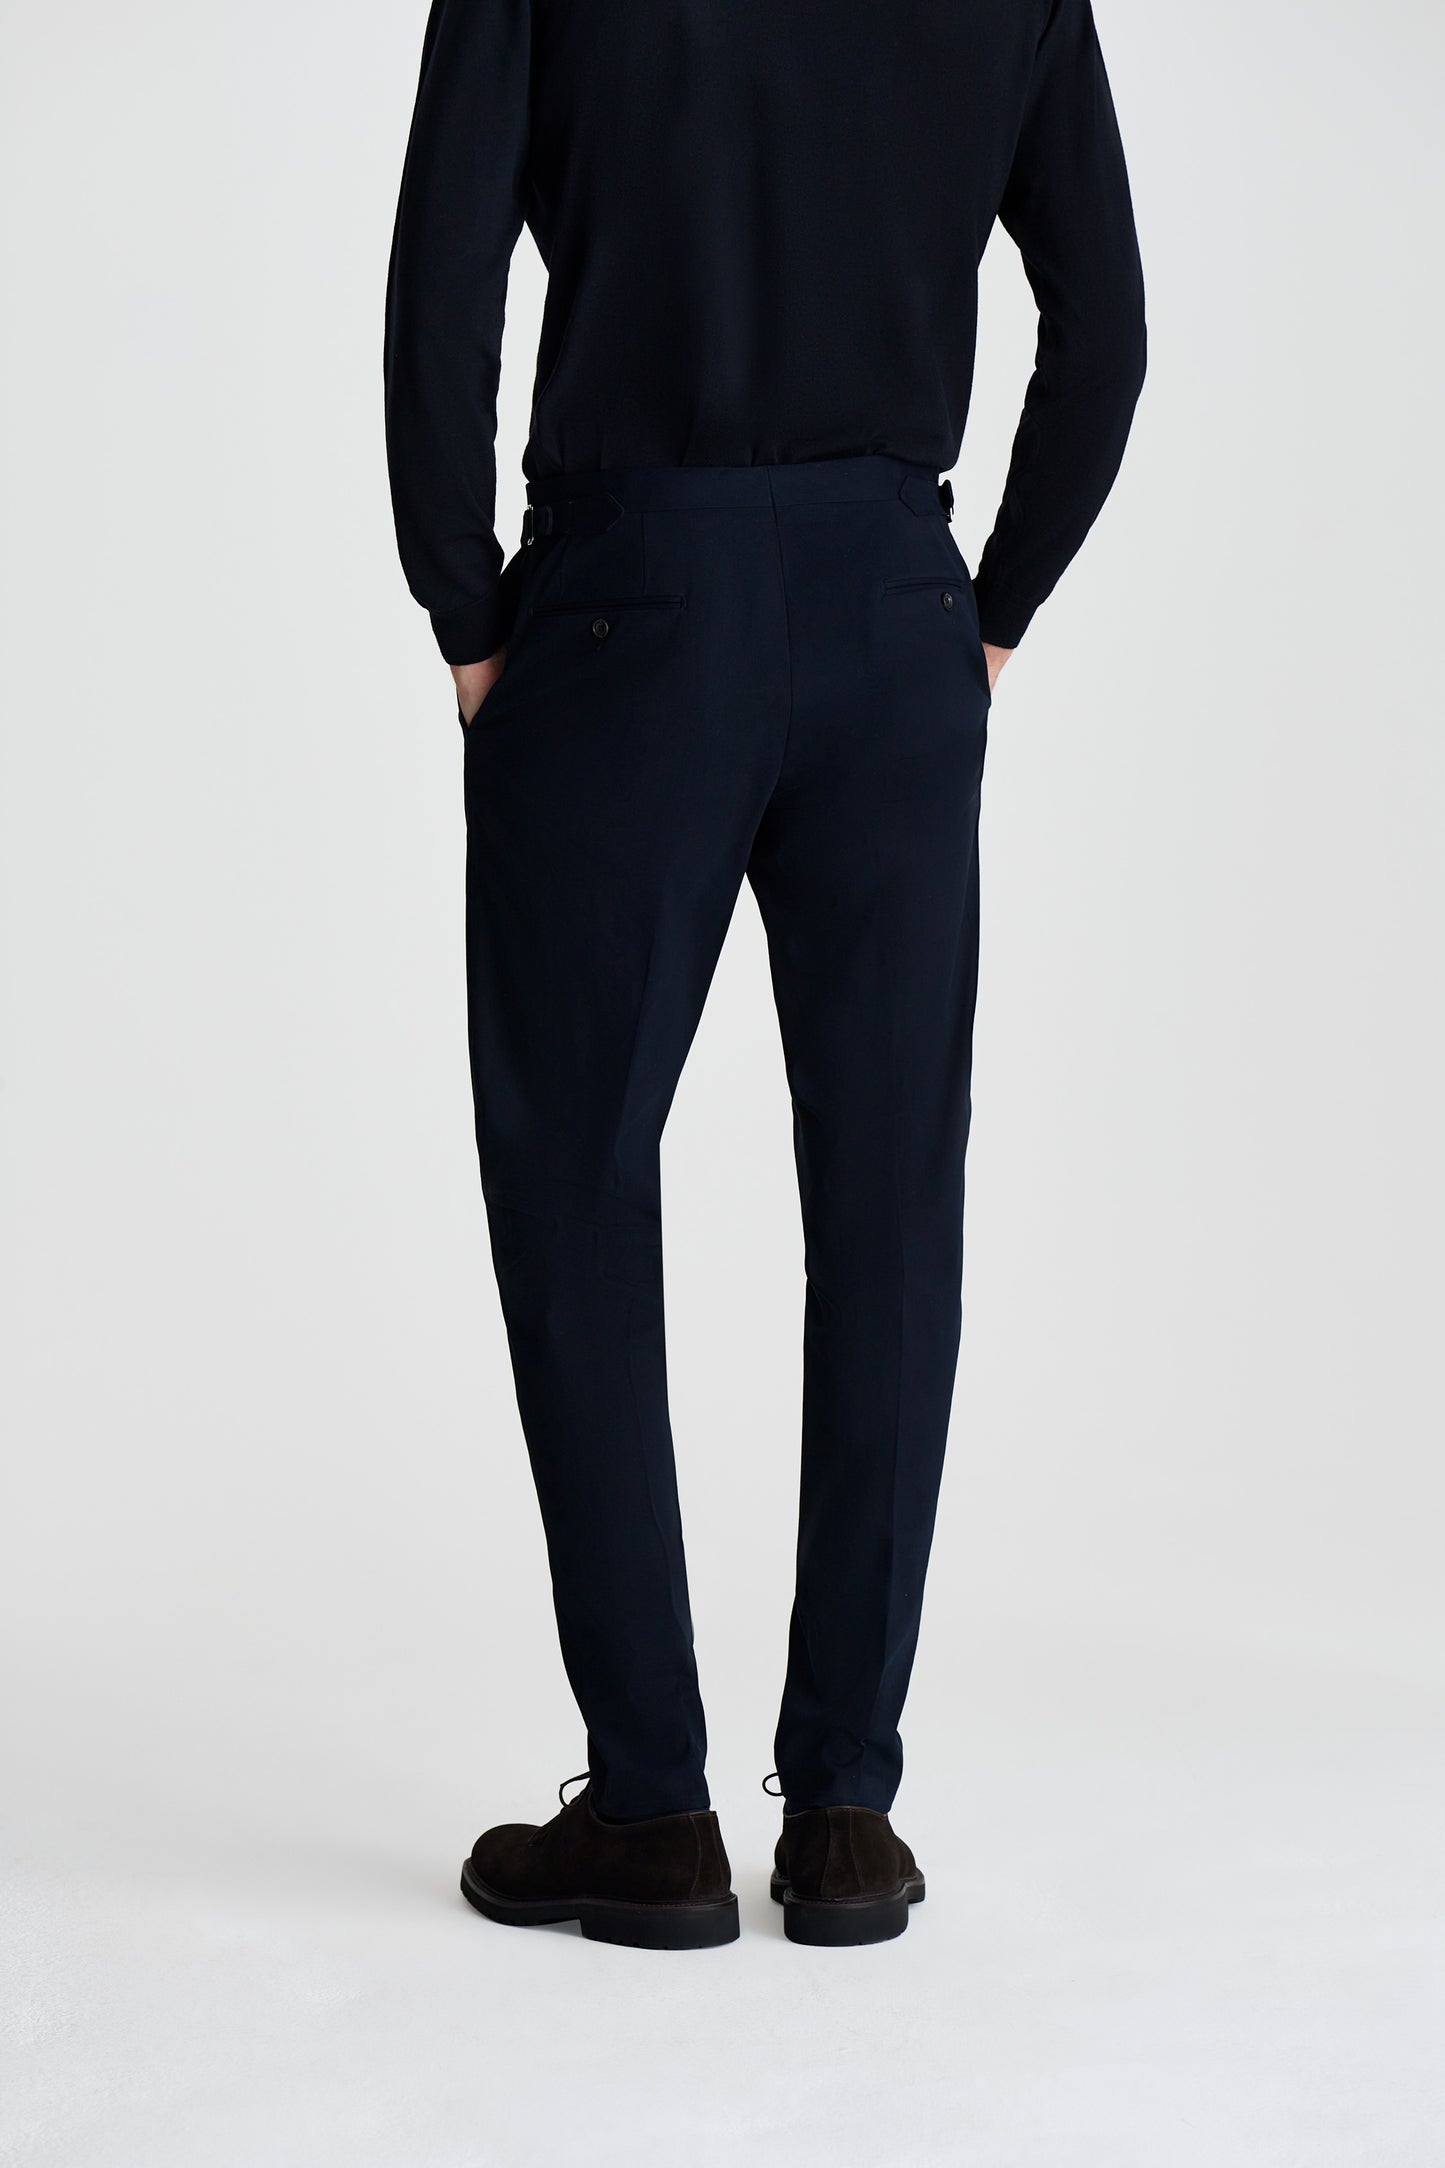 Brushed Cotton Double Breasted Peak Lapel Suit Navy Trouser Model Back Image